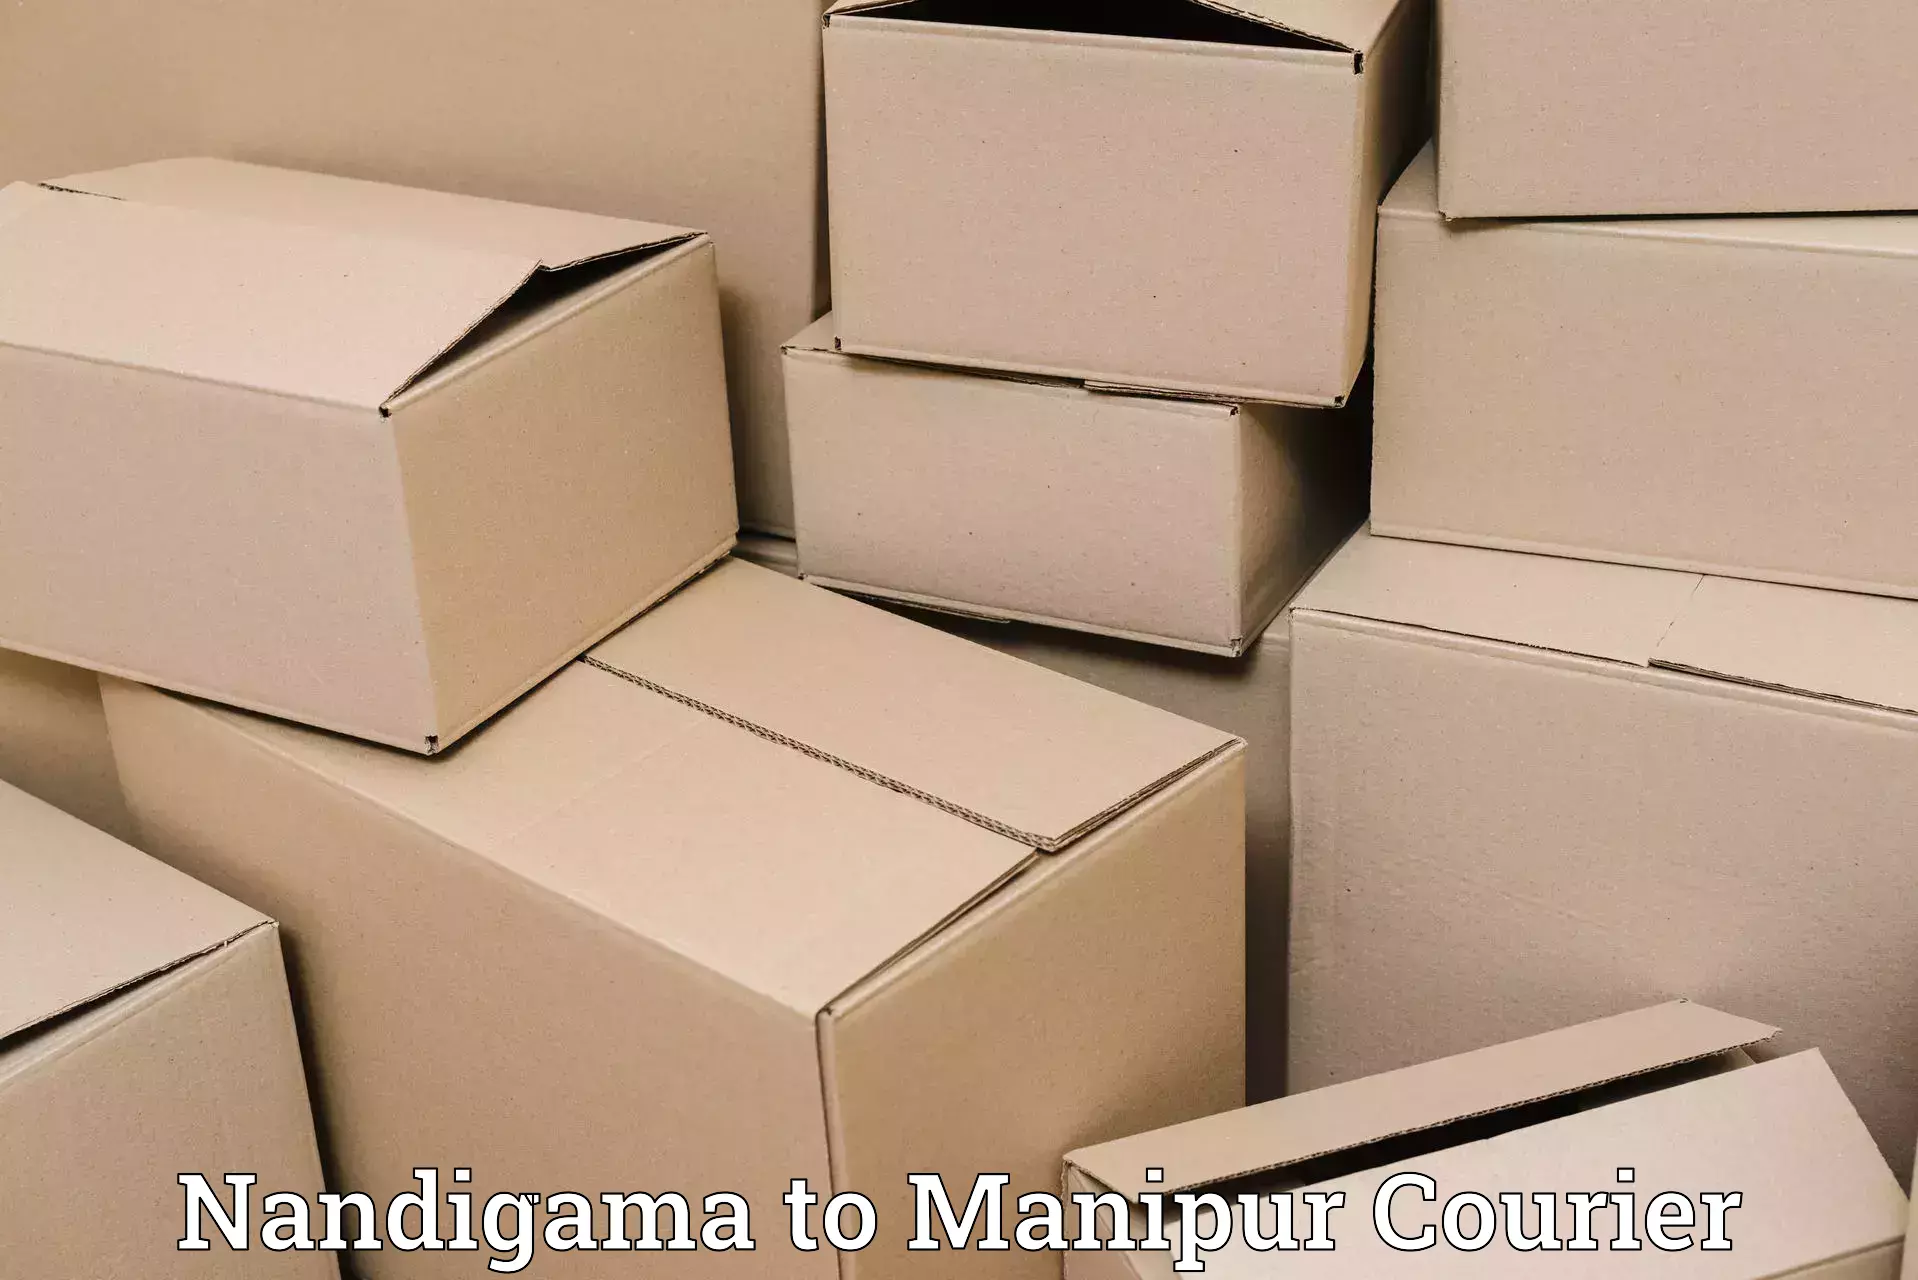 Global shipping networks Nandigama to Manipur